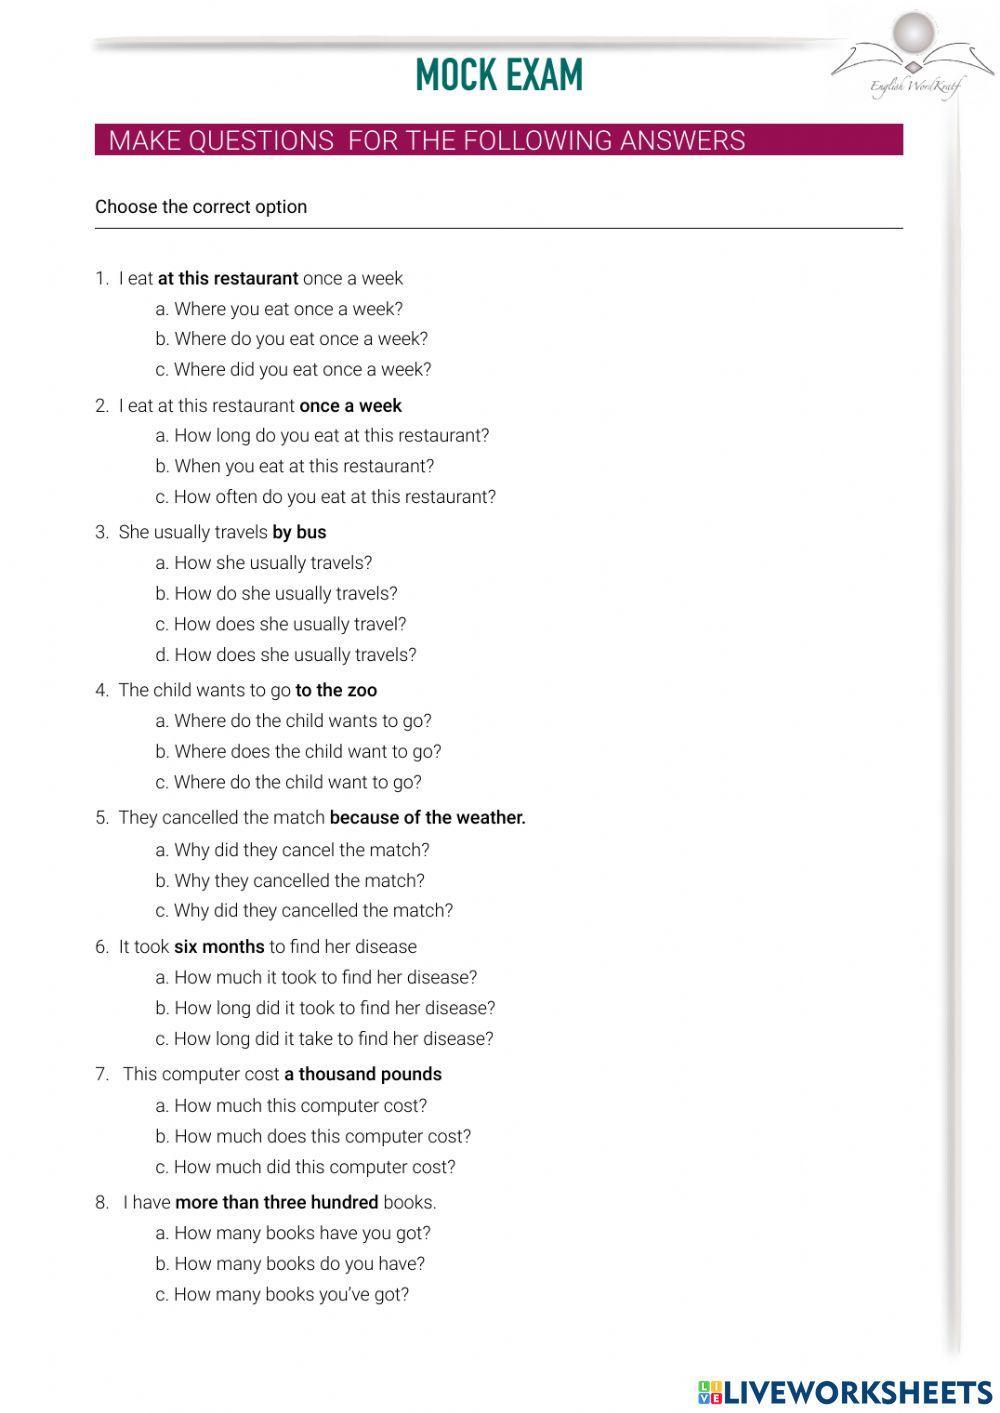 Make questions for the following answers